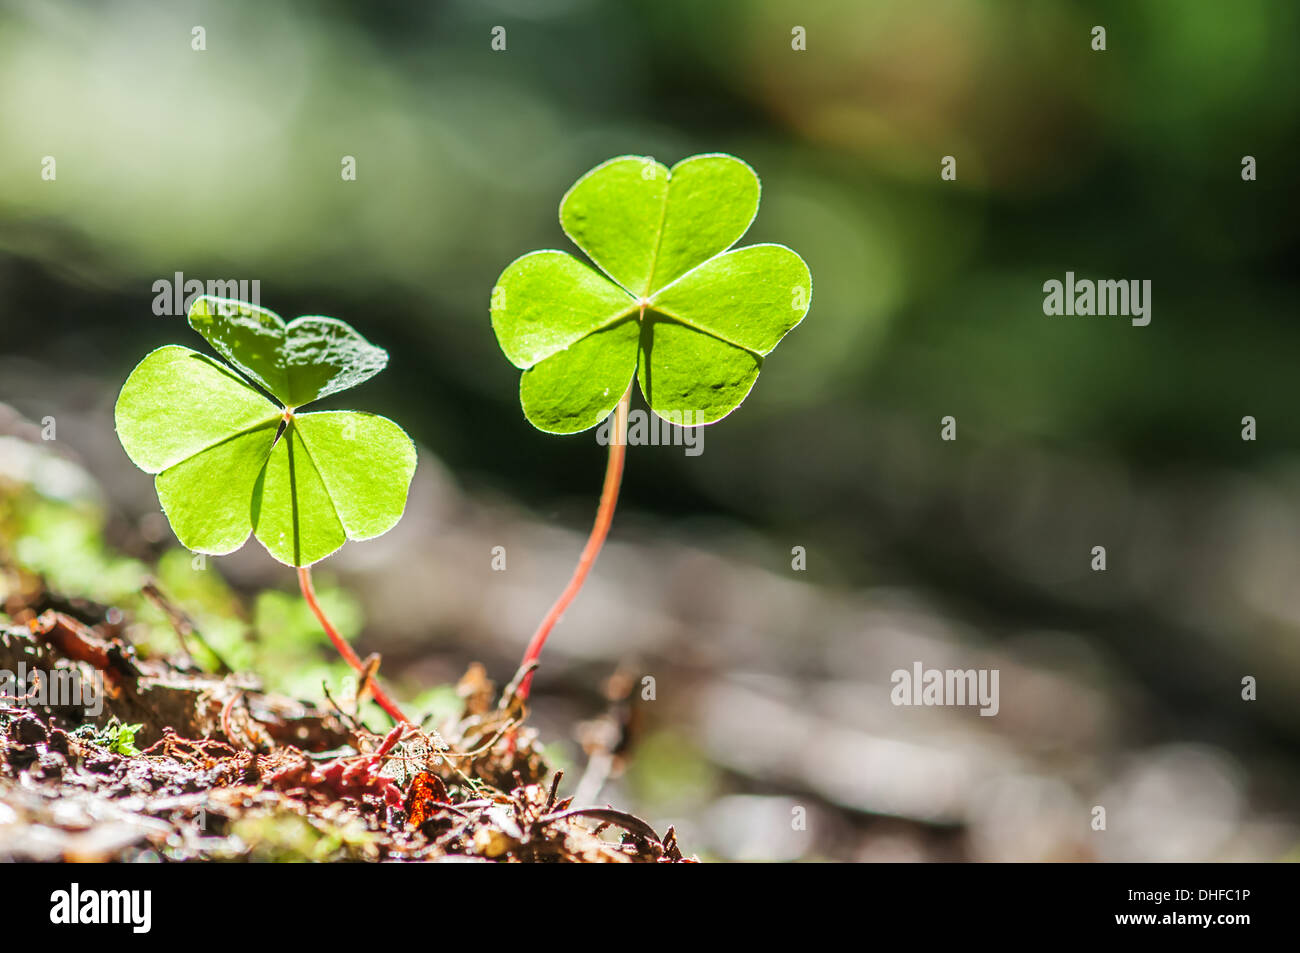 two clover leaf on dark background Stock Photo